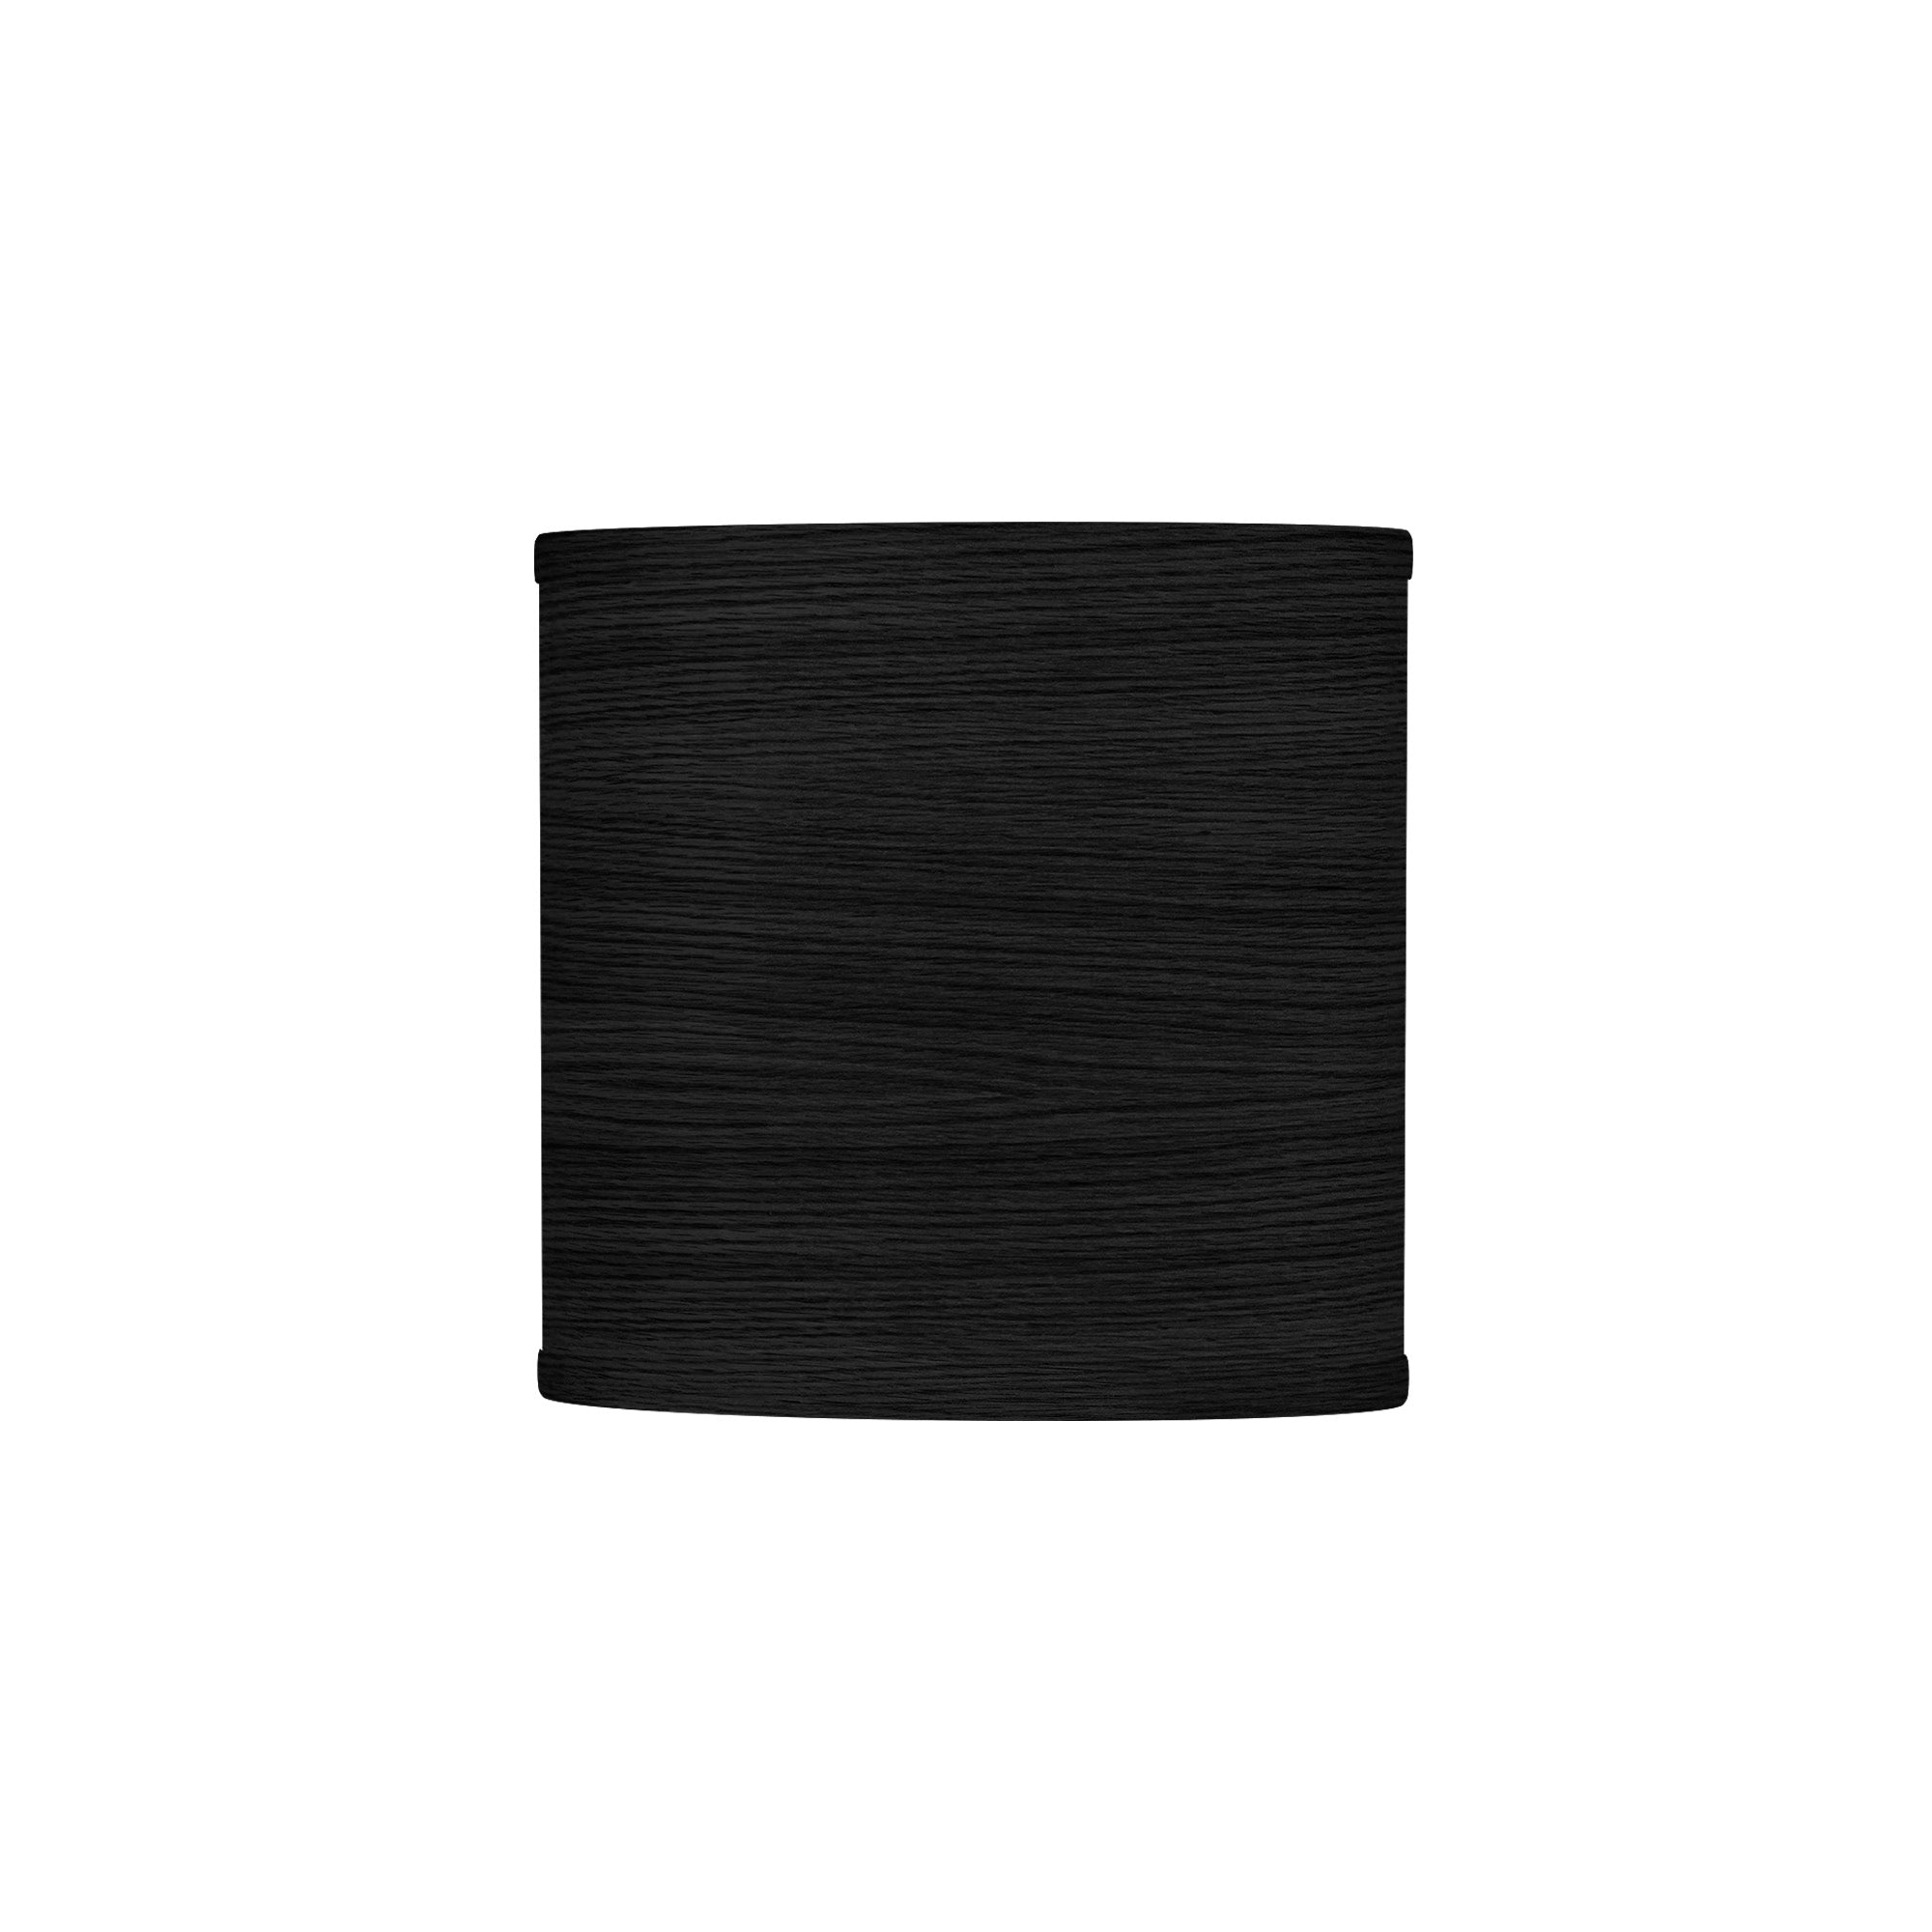 The Bryant Wall Sconce from Seascape Fixtures with a photo veneer shade in ebony color.